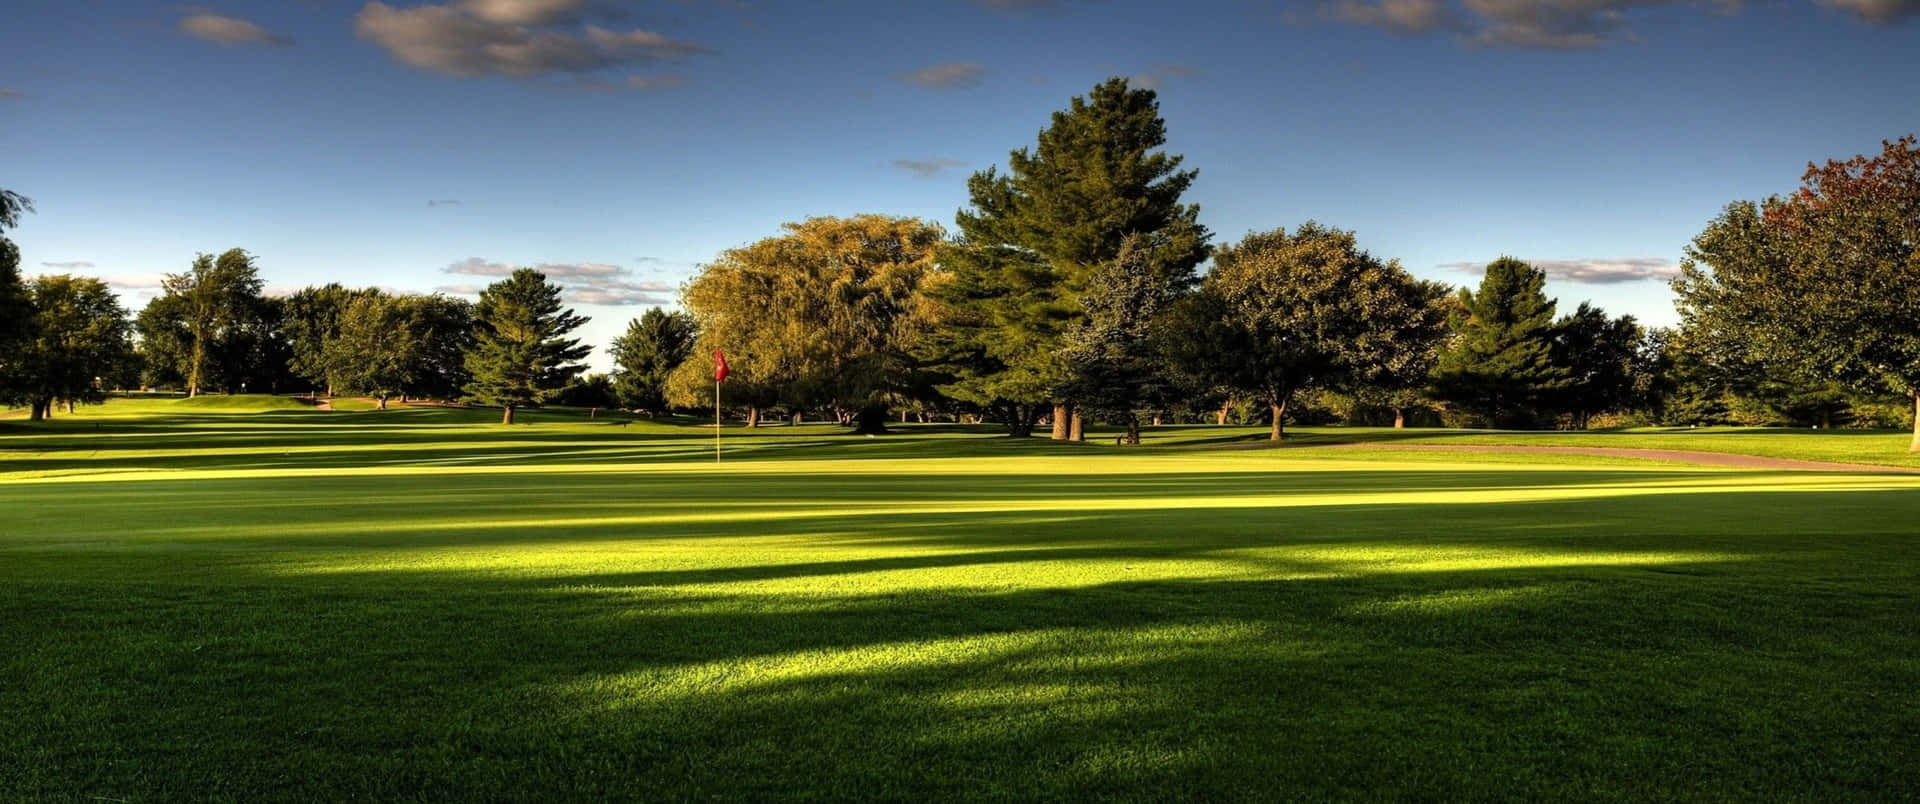 Experience Beautiful, Serene Golf Courses in 3440x1440p